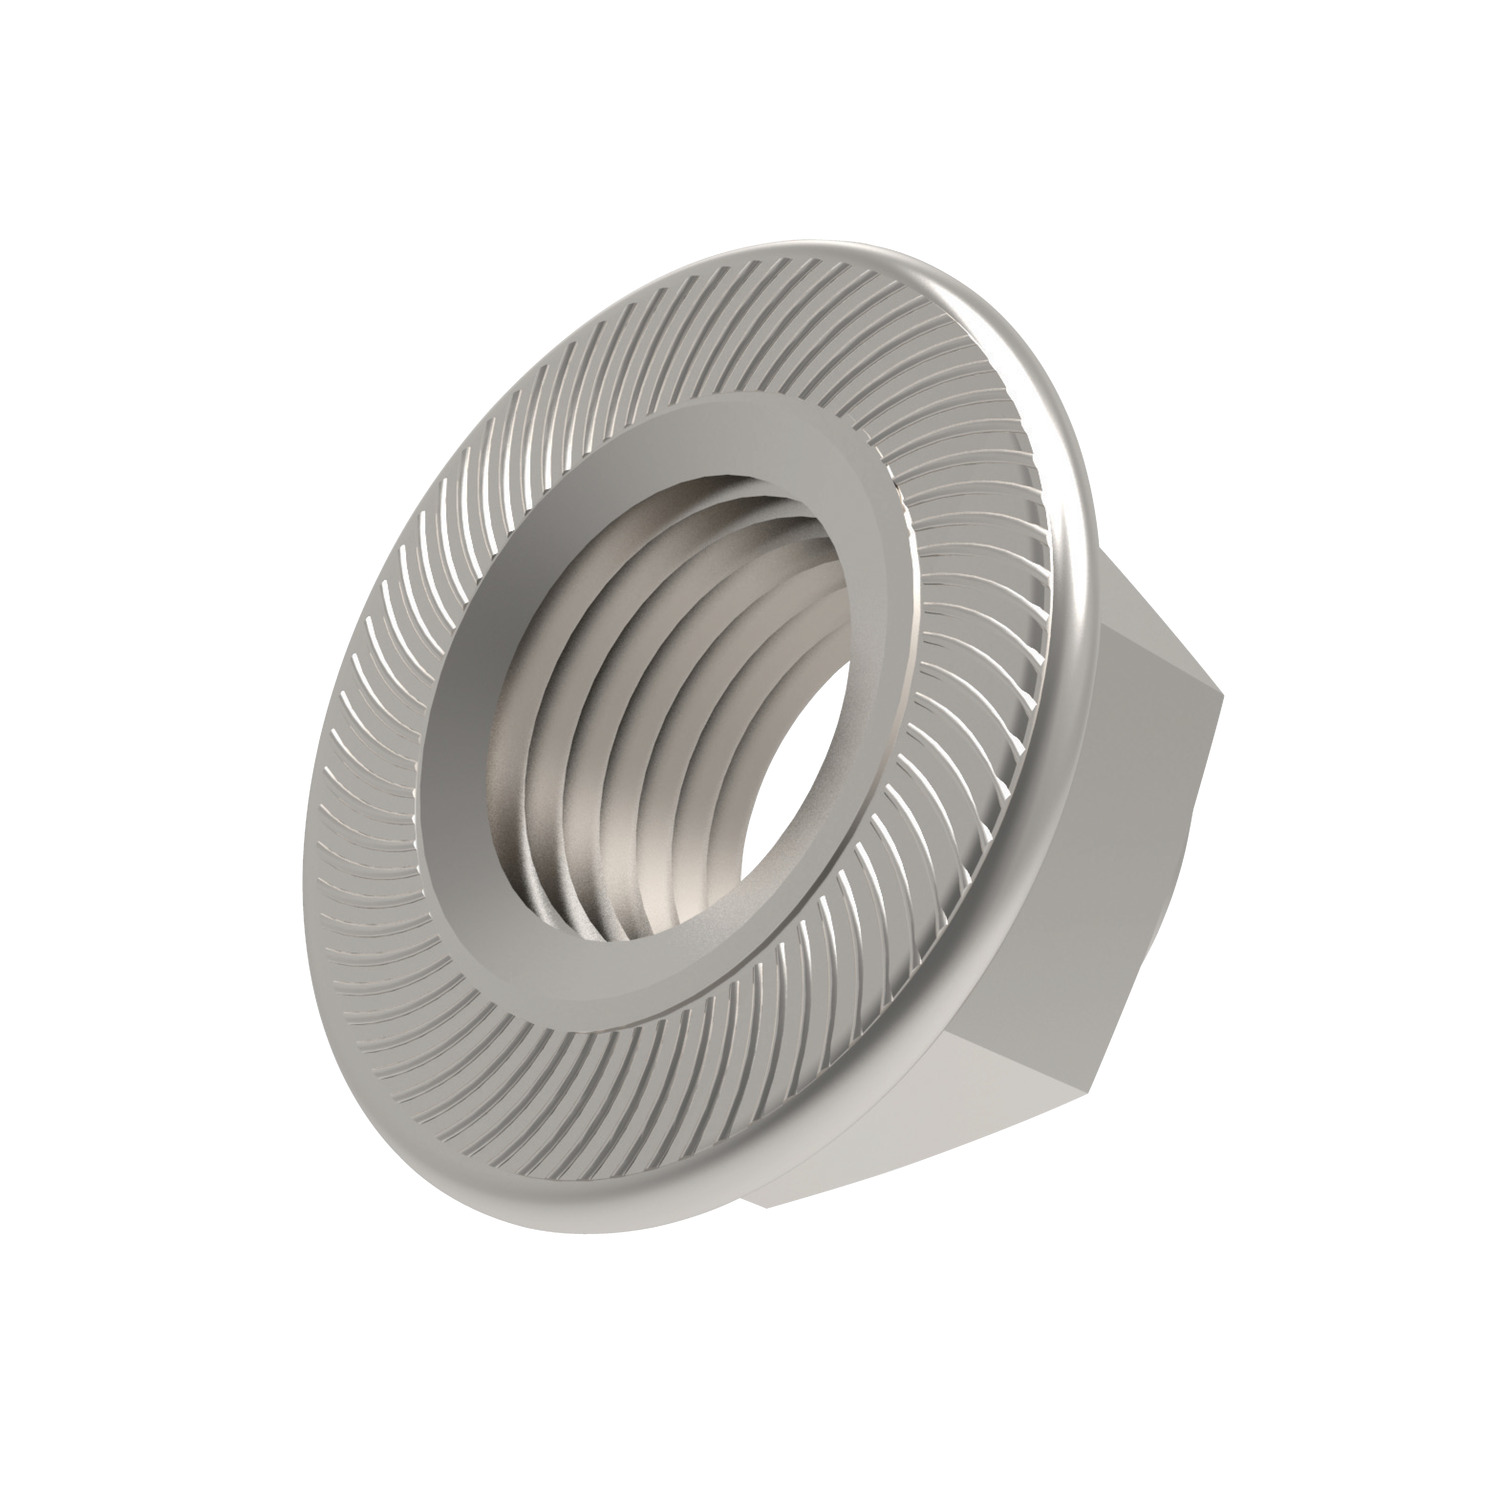 Serrated Flanged Nuts A2 stainless steel serrated flanged nuts. Manufactured to DIN 6923. Sizes range from M4 to M16.